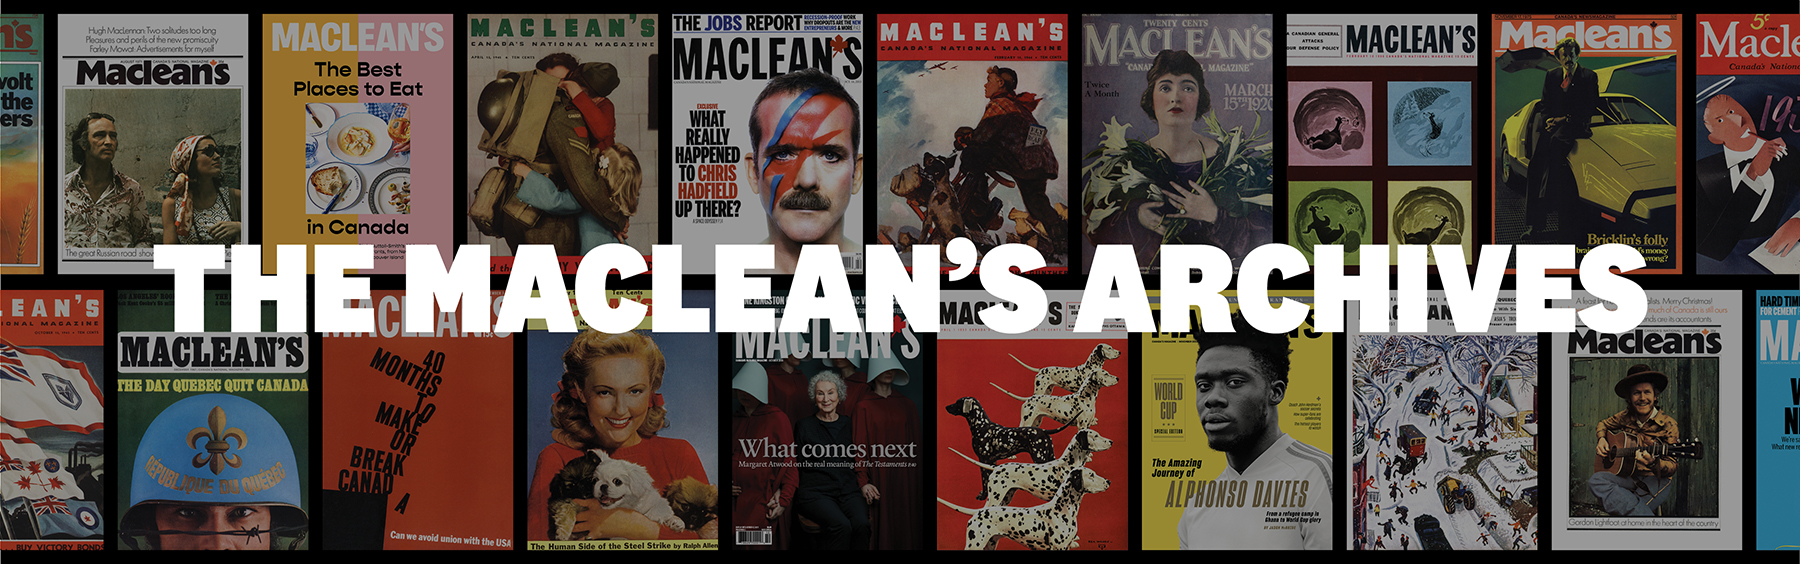 Maclean's Magazine Online Digital Archives - 

https://criterionpic.com/CPL/macleans.html